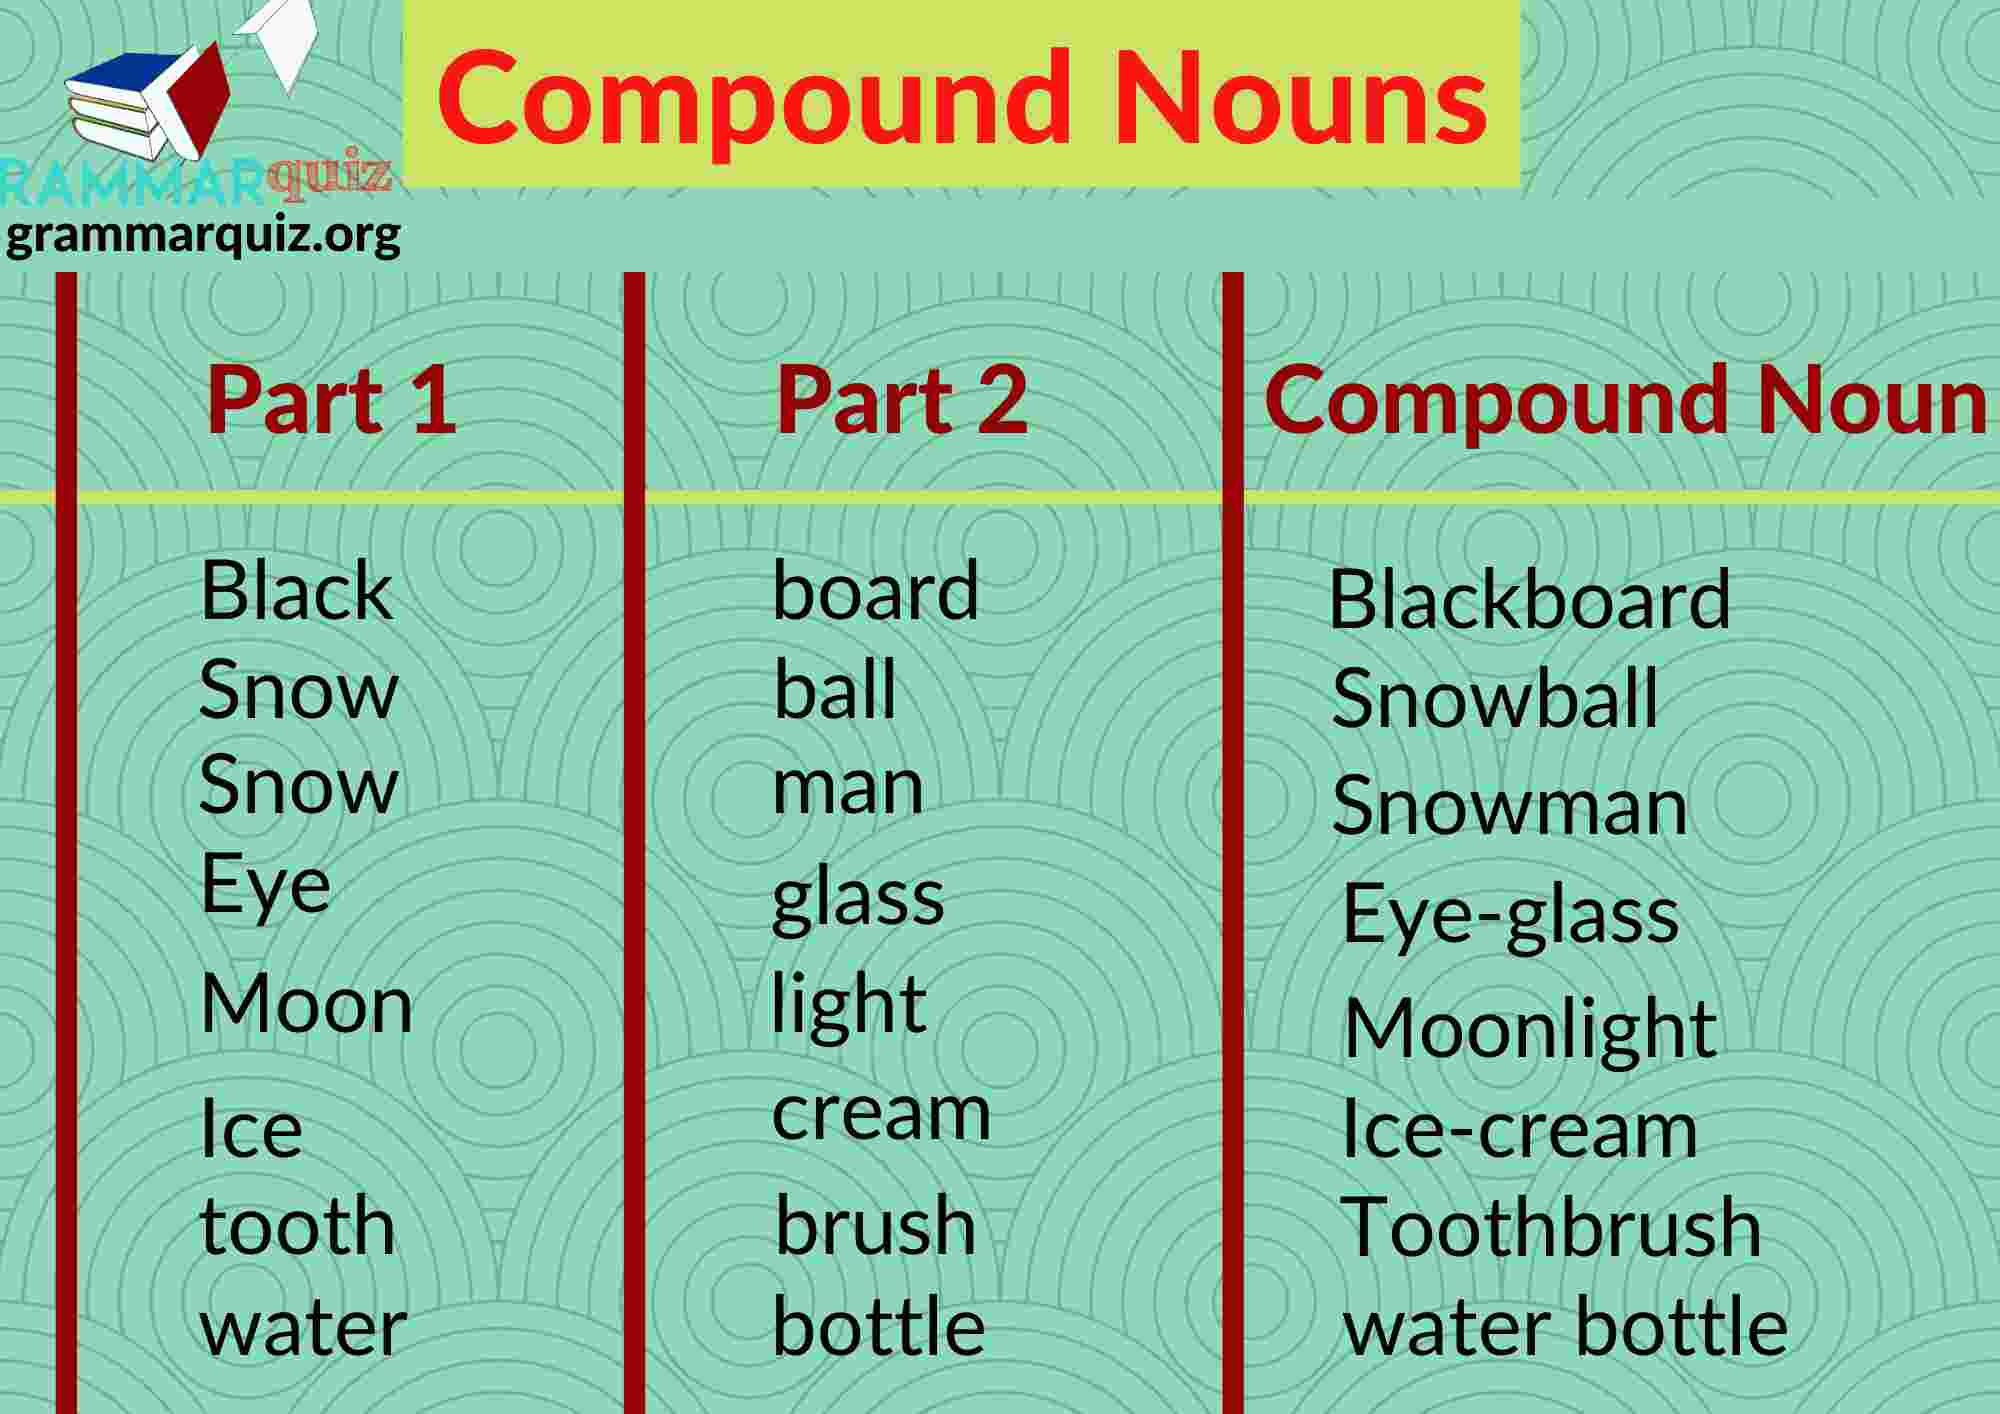 Compound Noun Formation & Examples